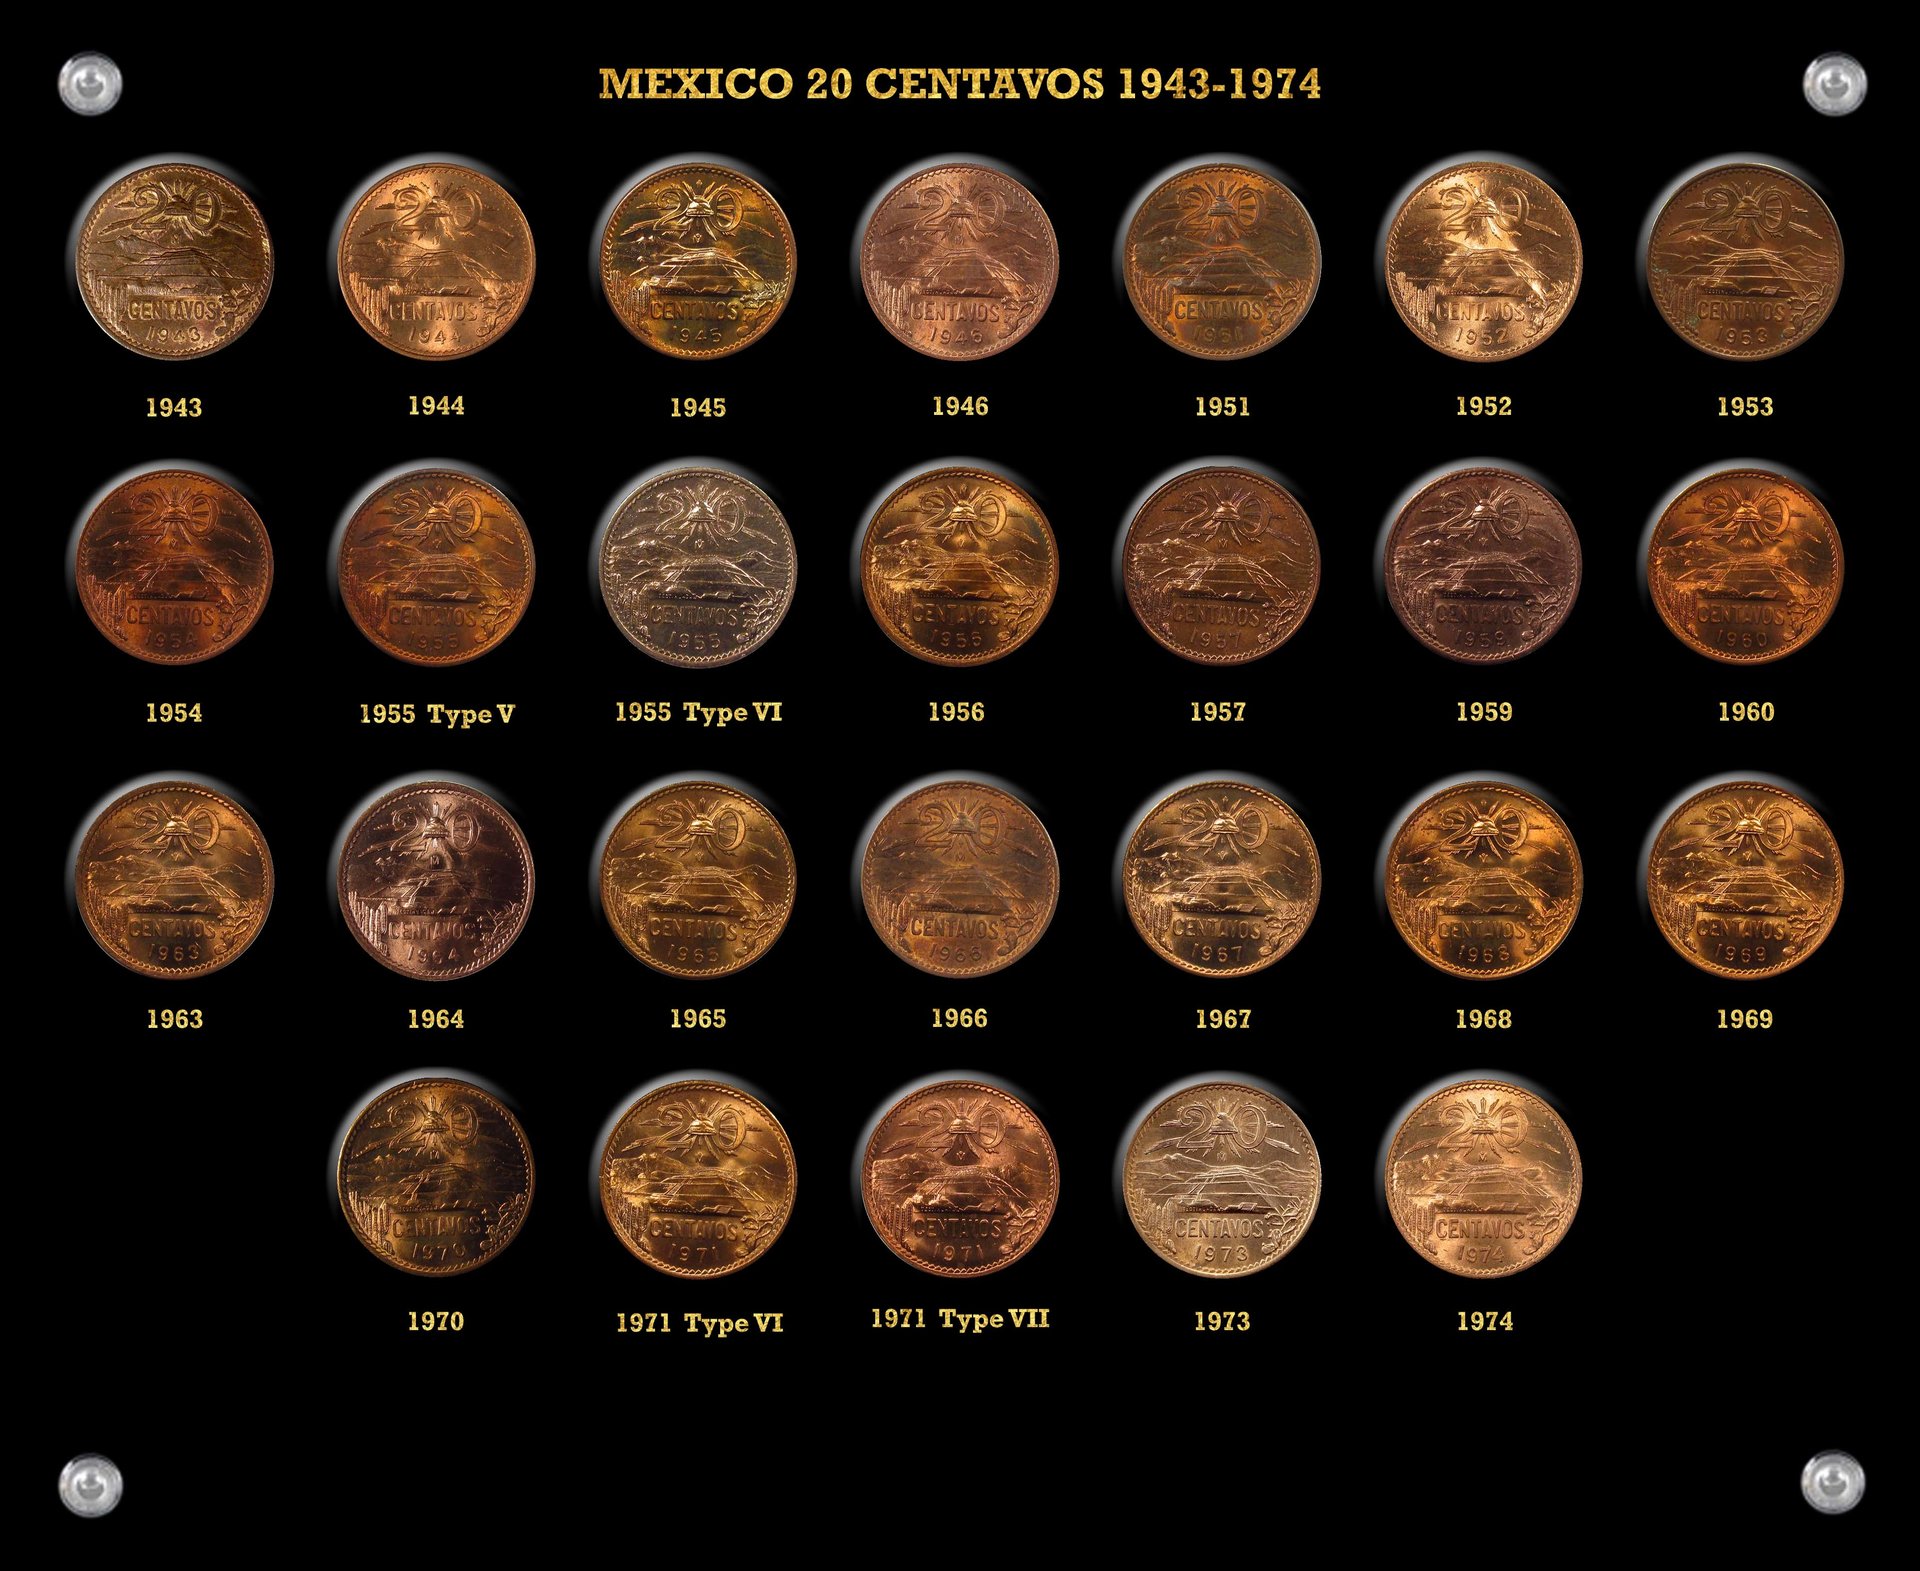 mexico 20 centavos plaque solid black and gold with screws.jpg